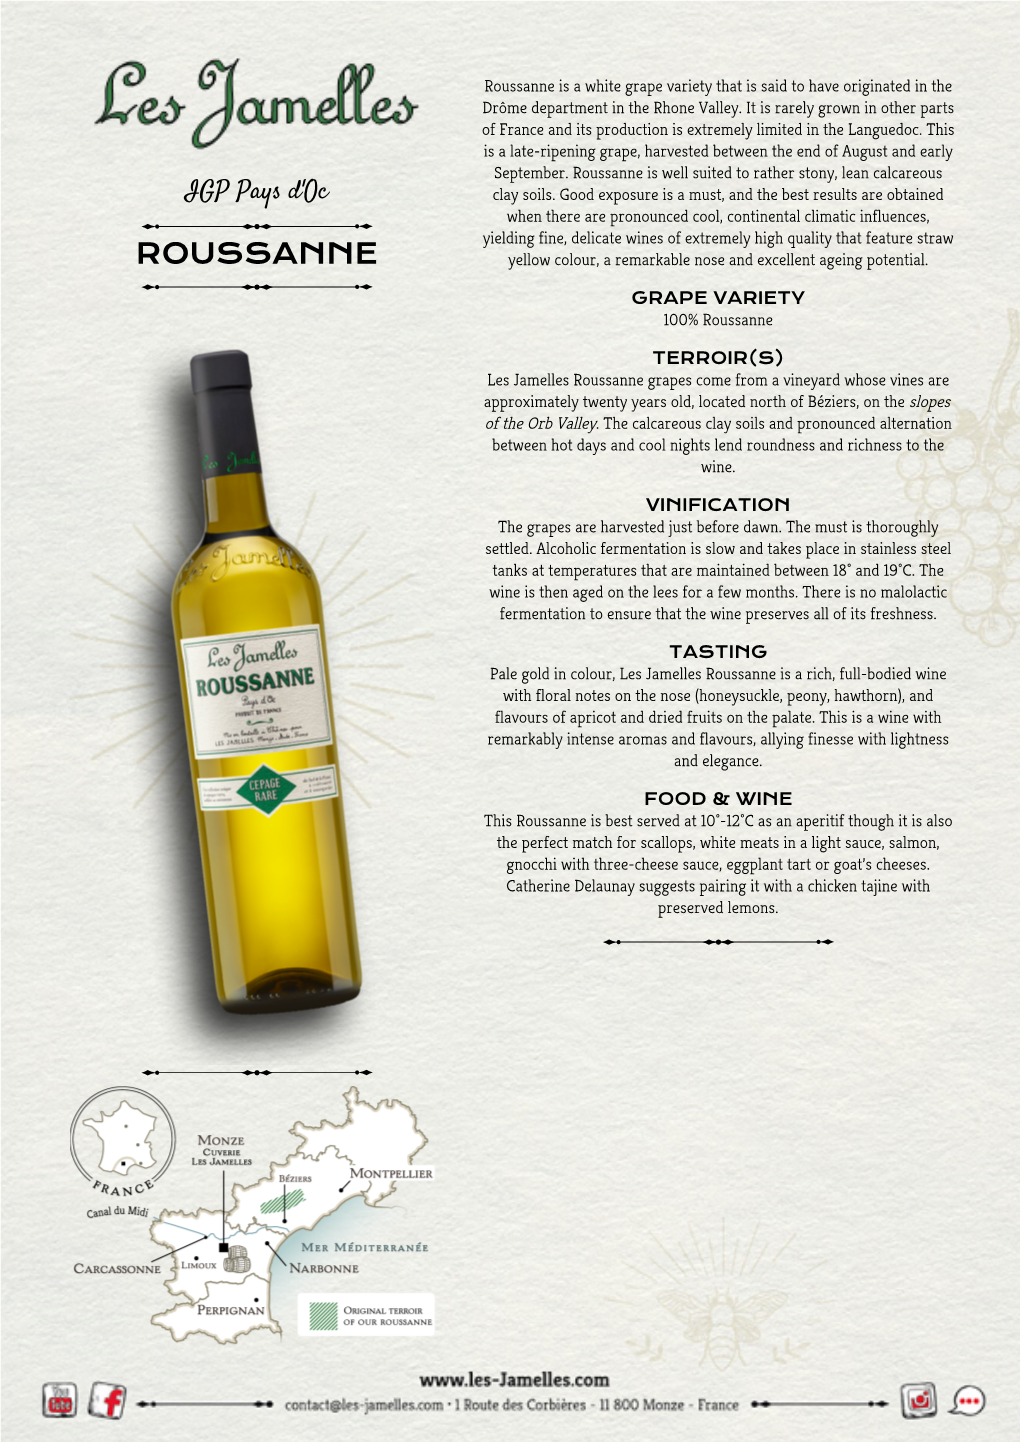 Roussanne Is a White Grape Variety That Is Said to Have Originated in the Drôme Department in the Rhone Valley